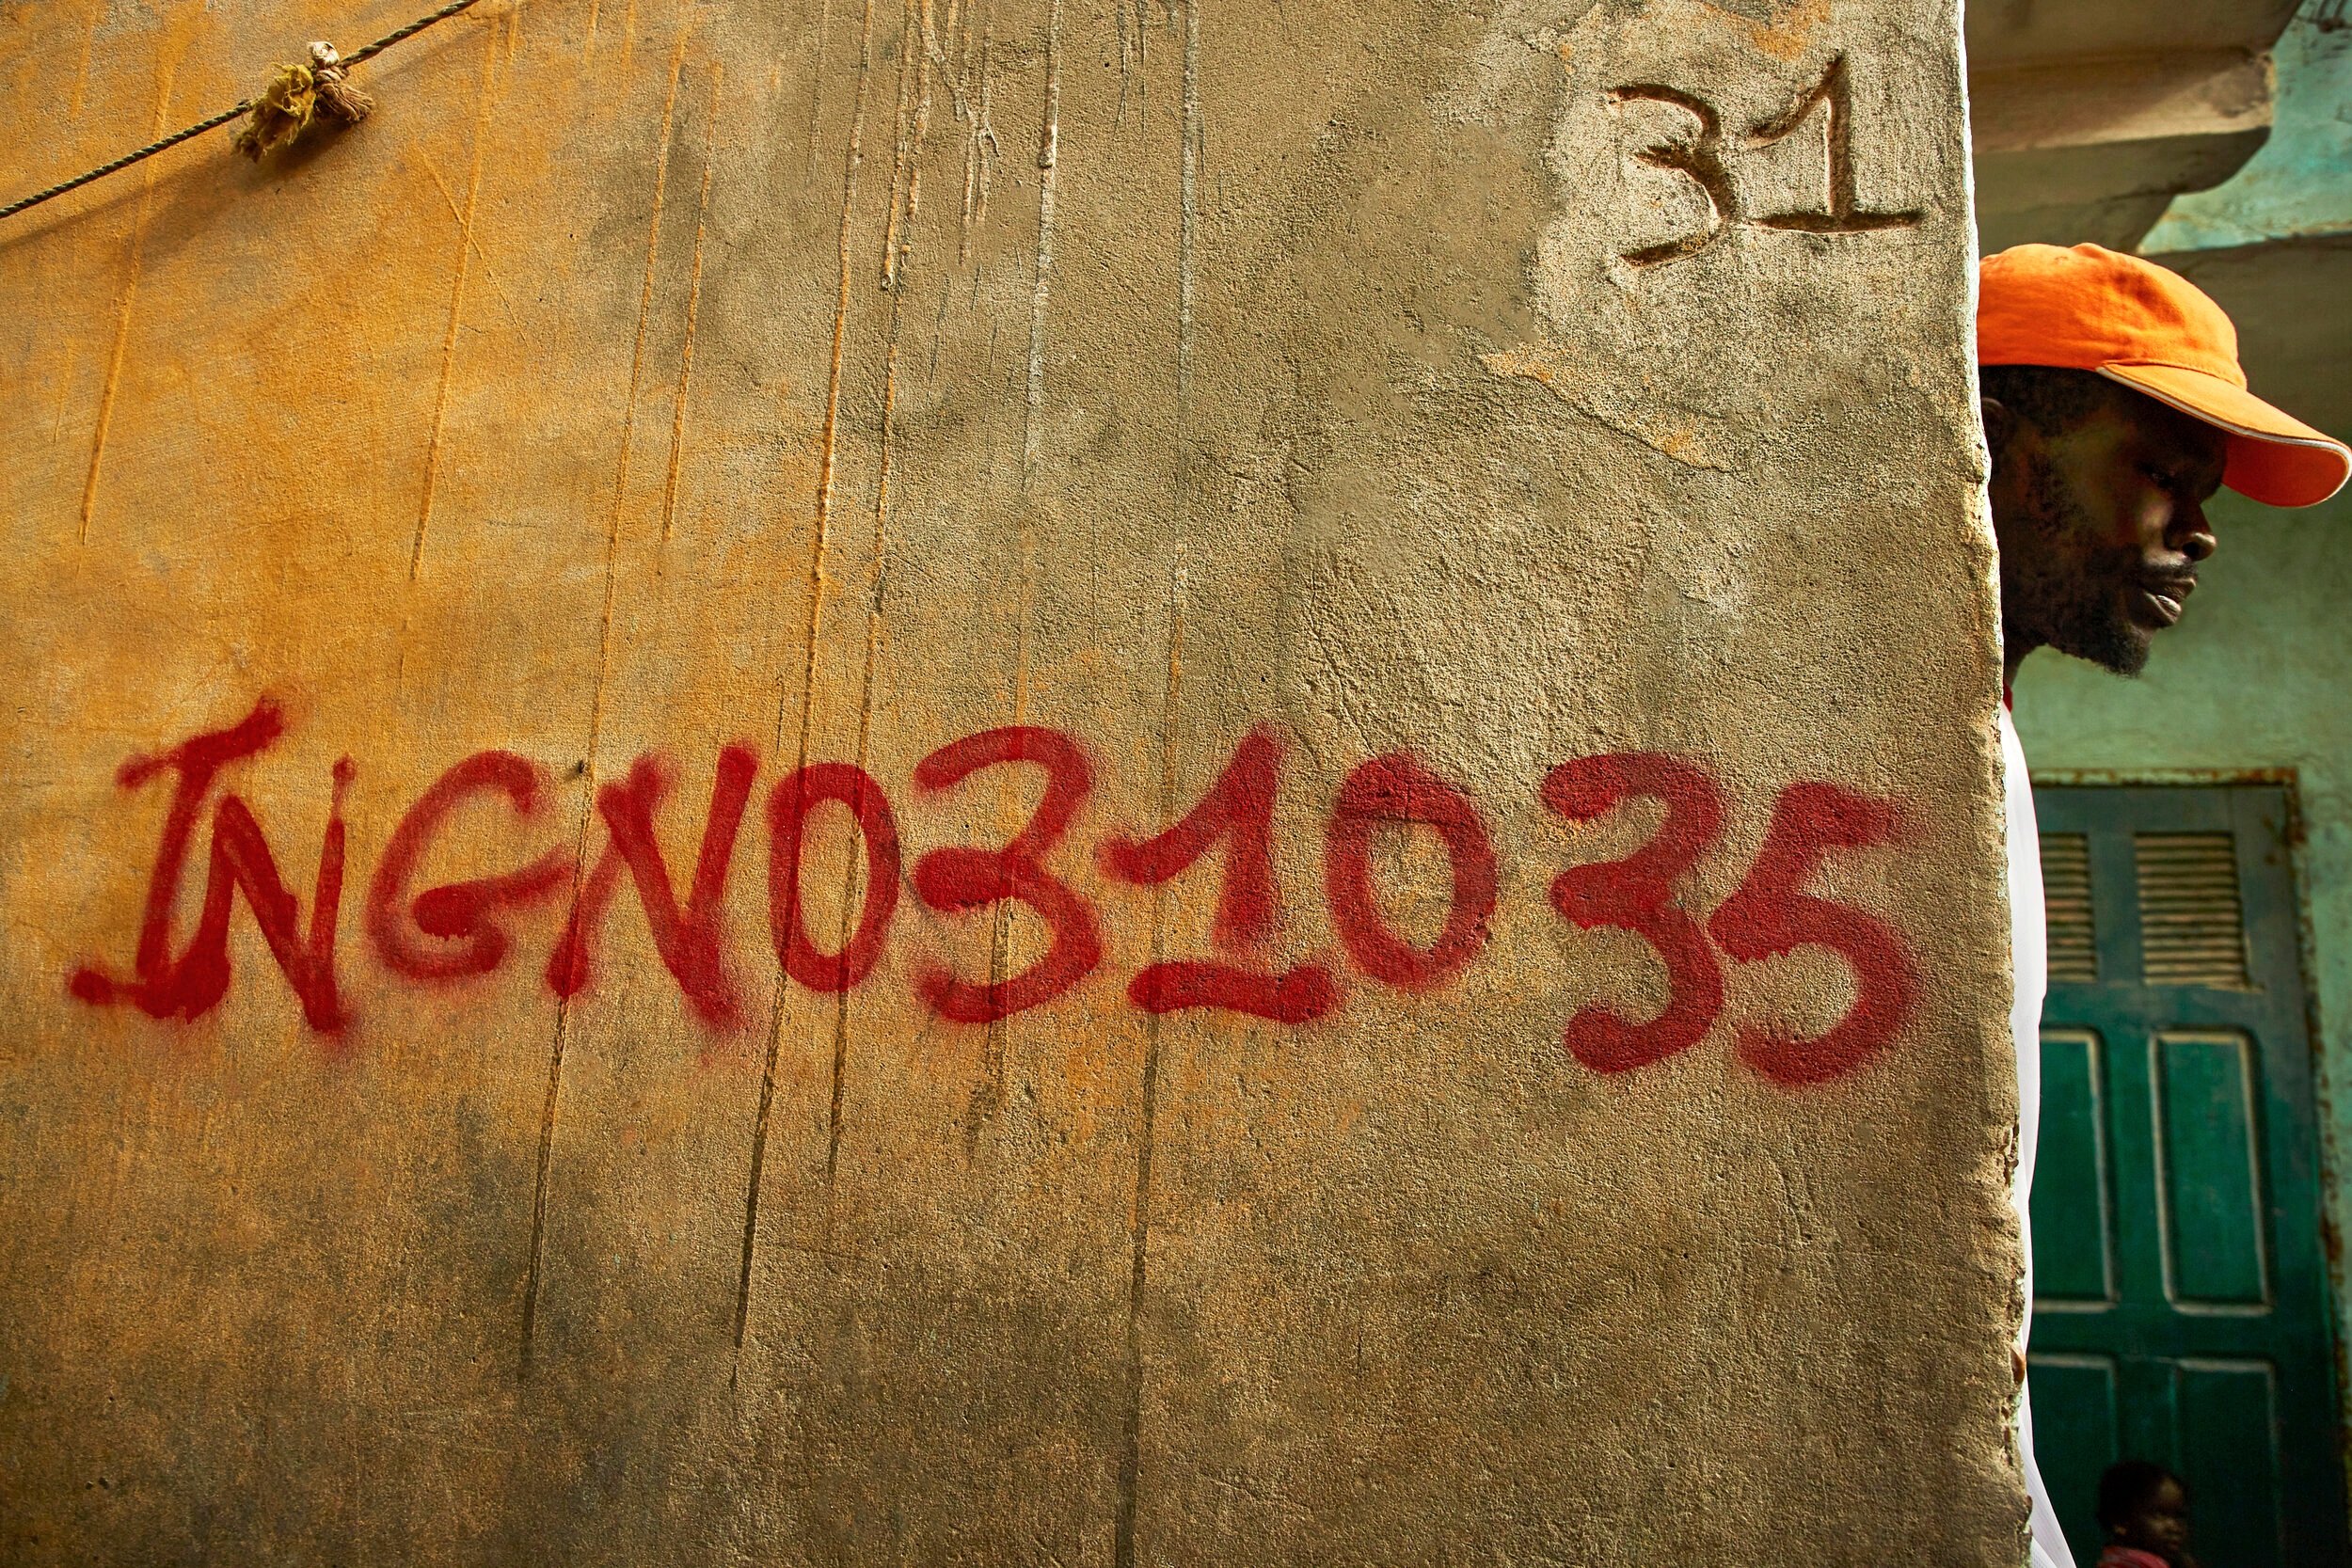  The Senegalese government keeps track of the crumbling houses on the Saint Louis coast with a series of personalized numbers. When the properties finally become so decayed that people can no longer live in them, the families are identified by these 